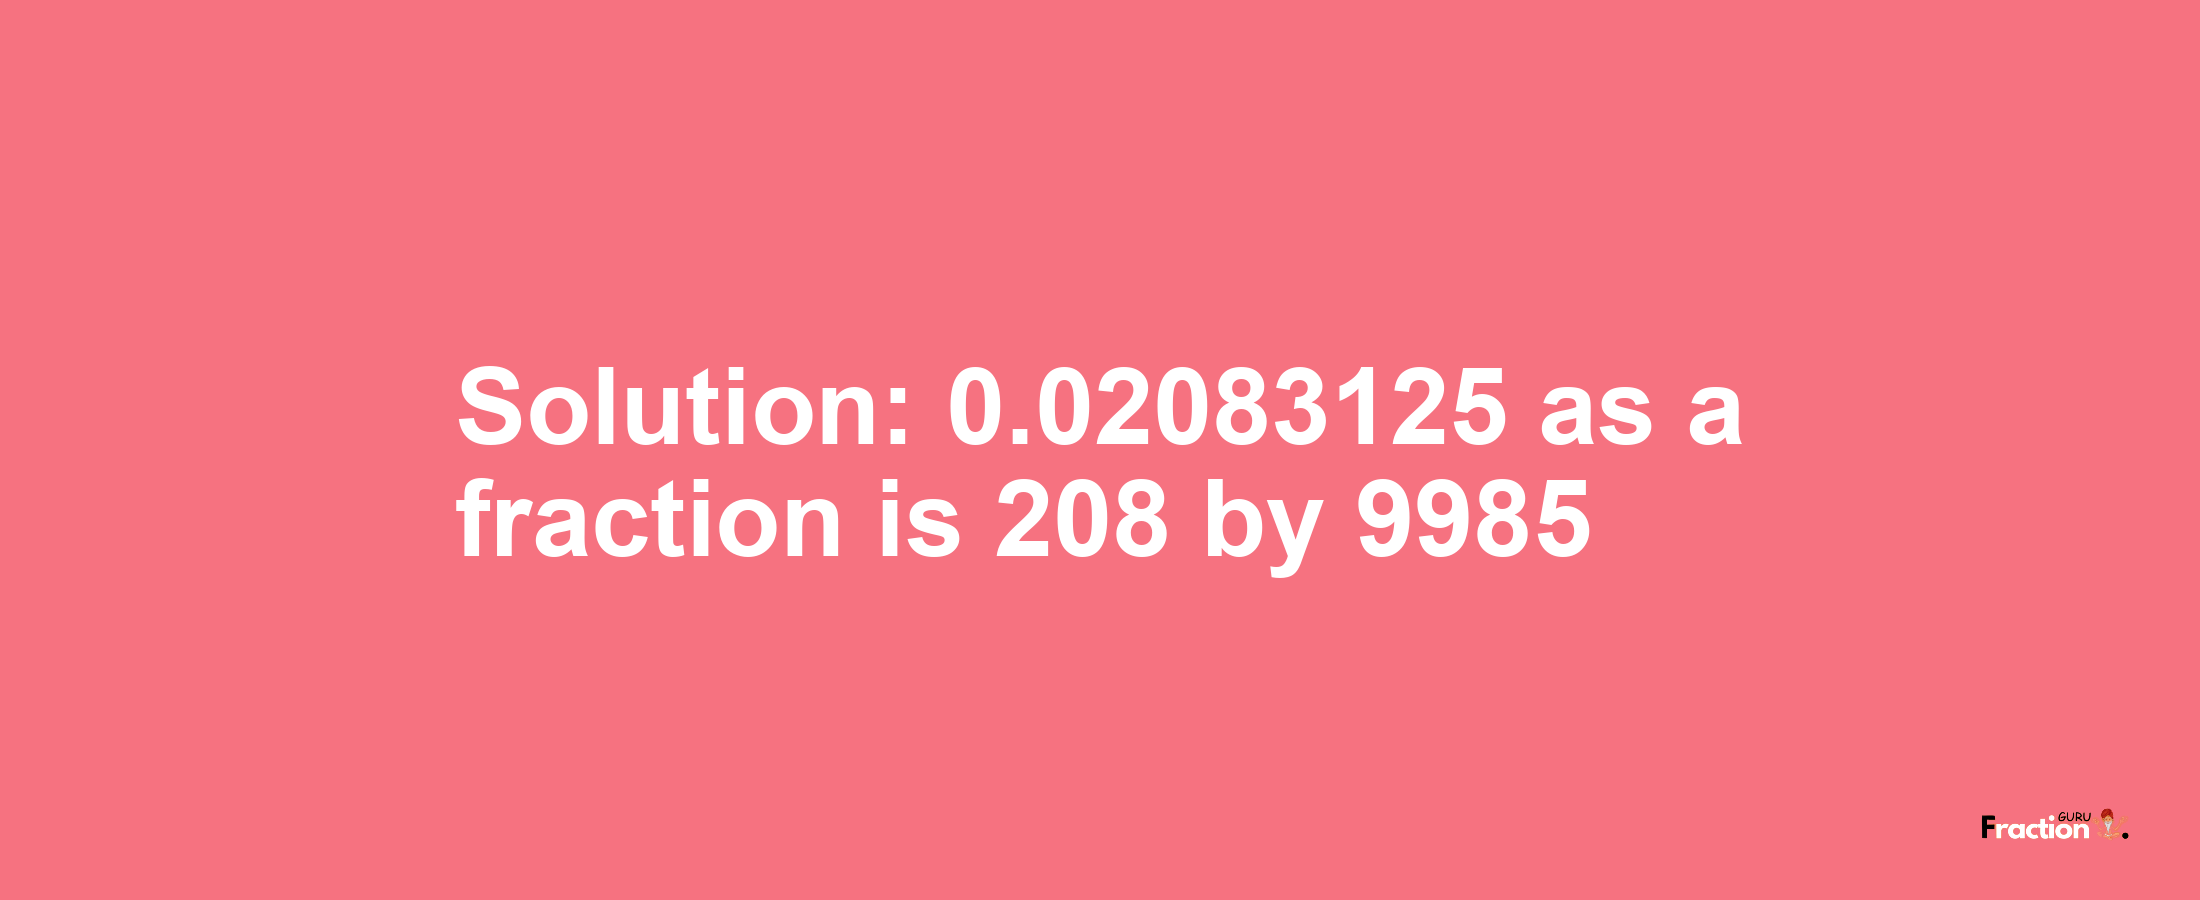 Solution:0.02083125 as a fraction is 208/9985